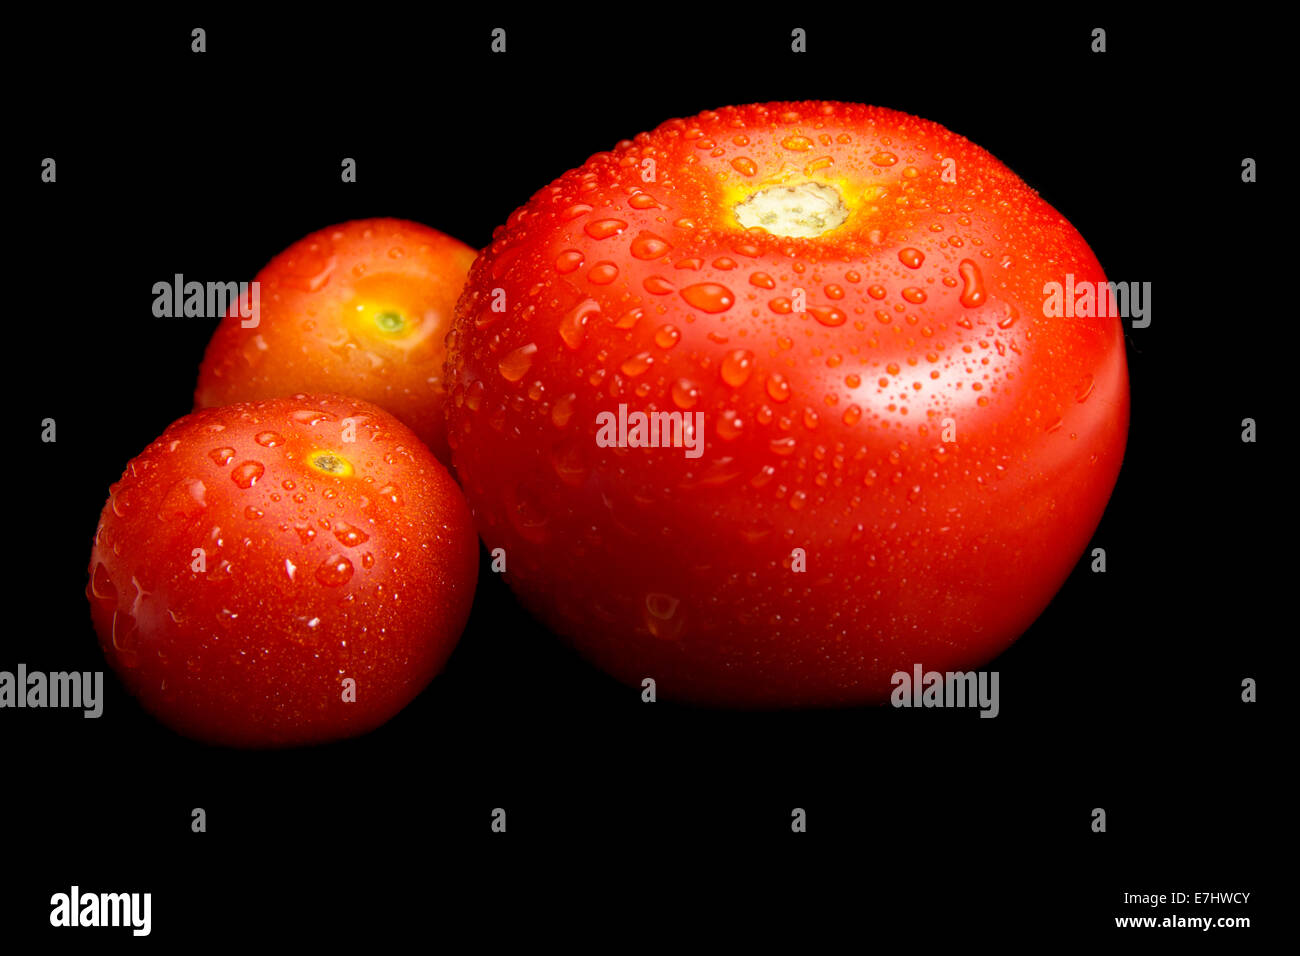 Tomato with water drops isolated on black background Stock Photo